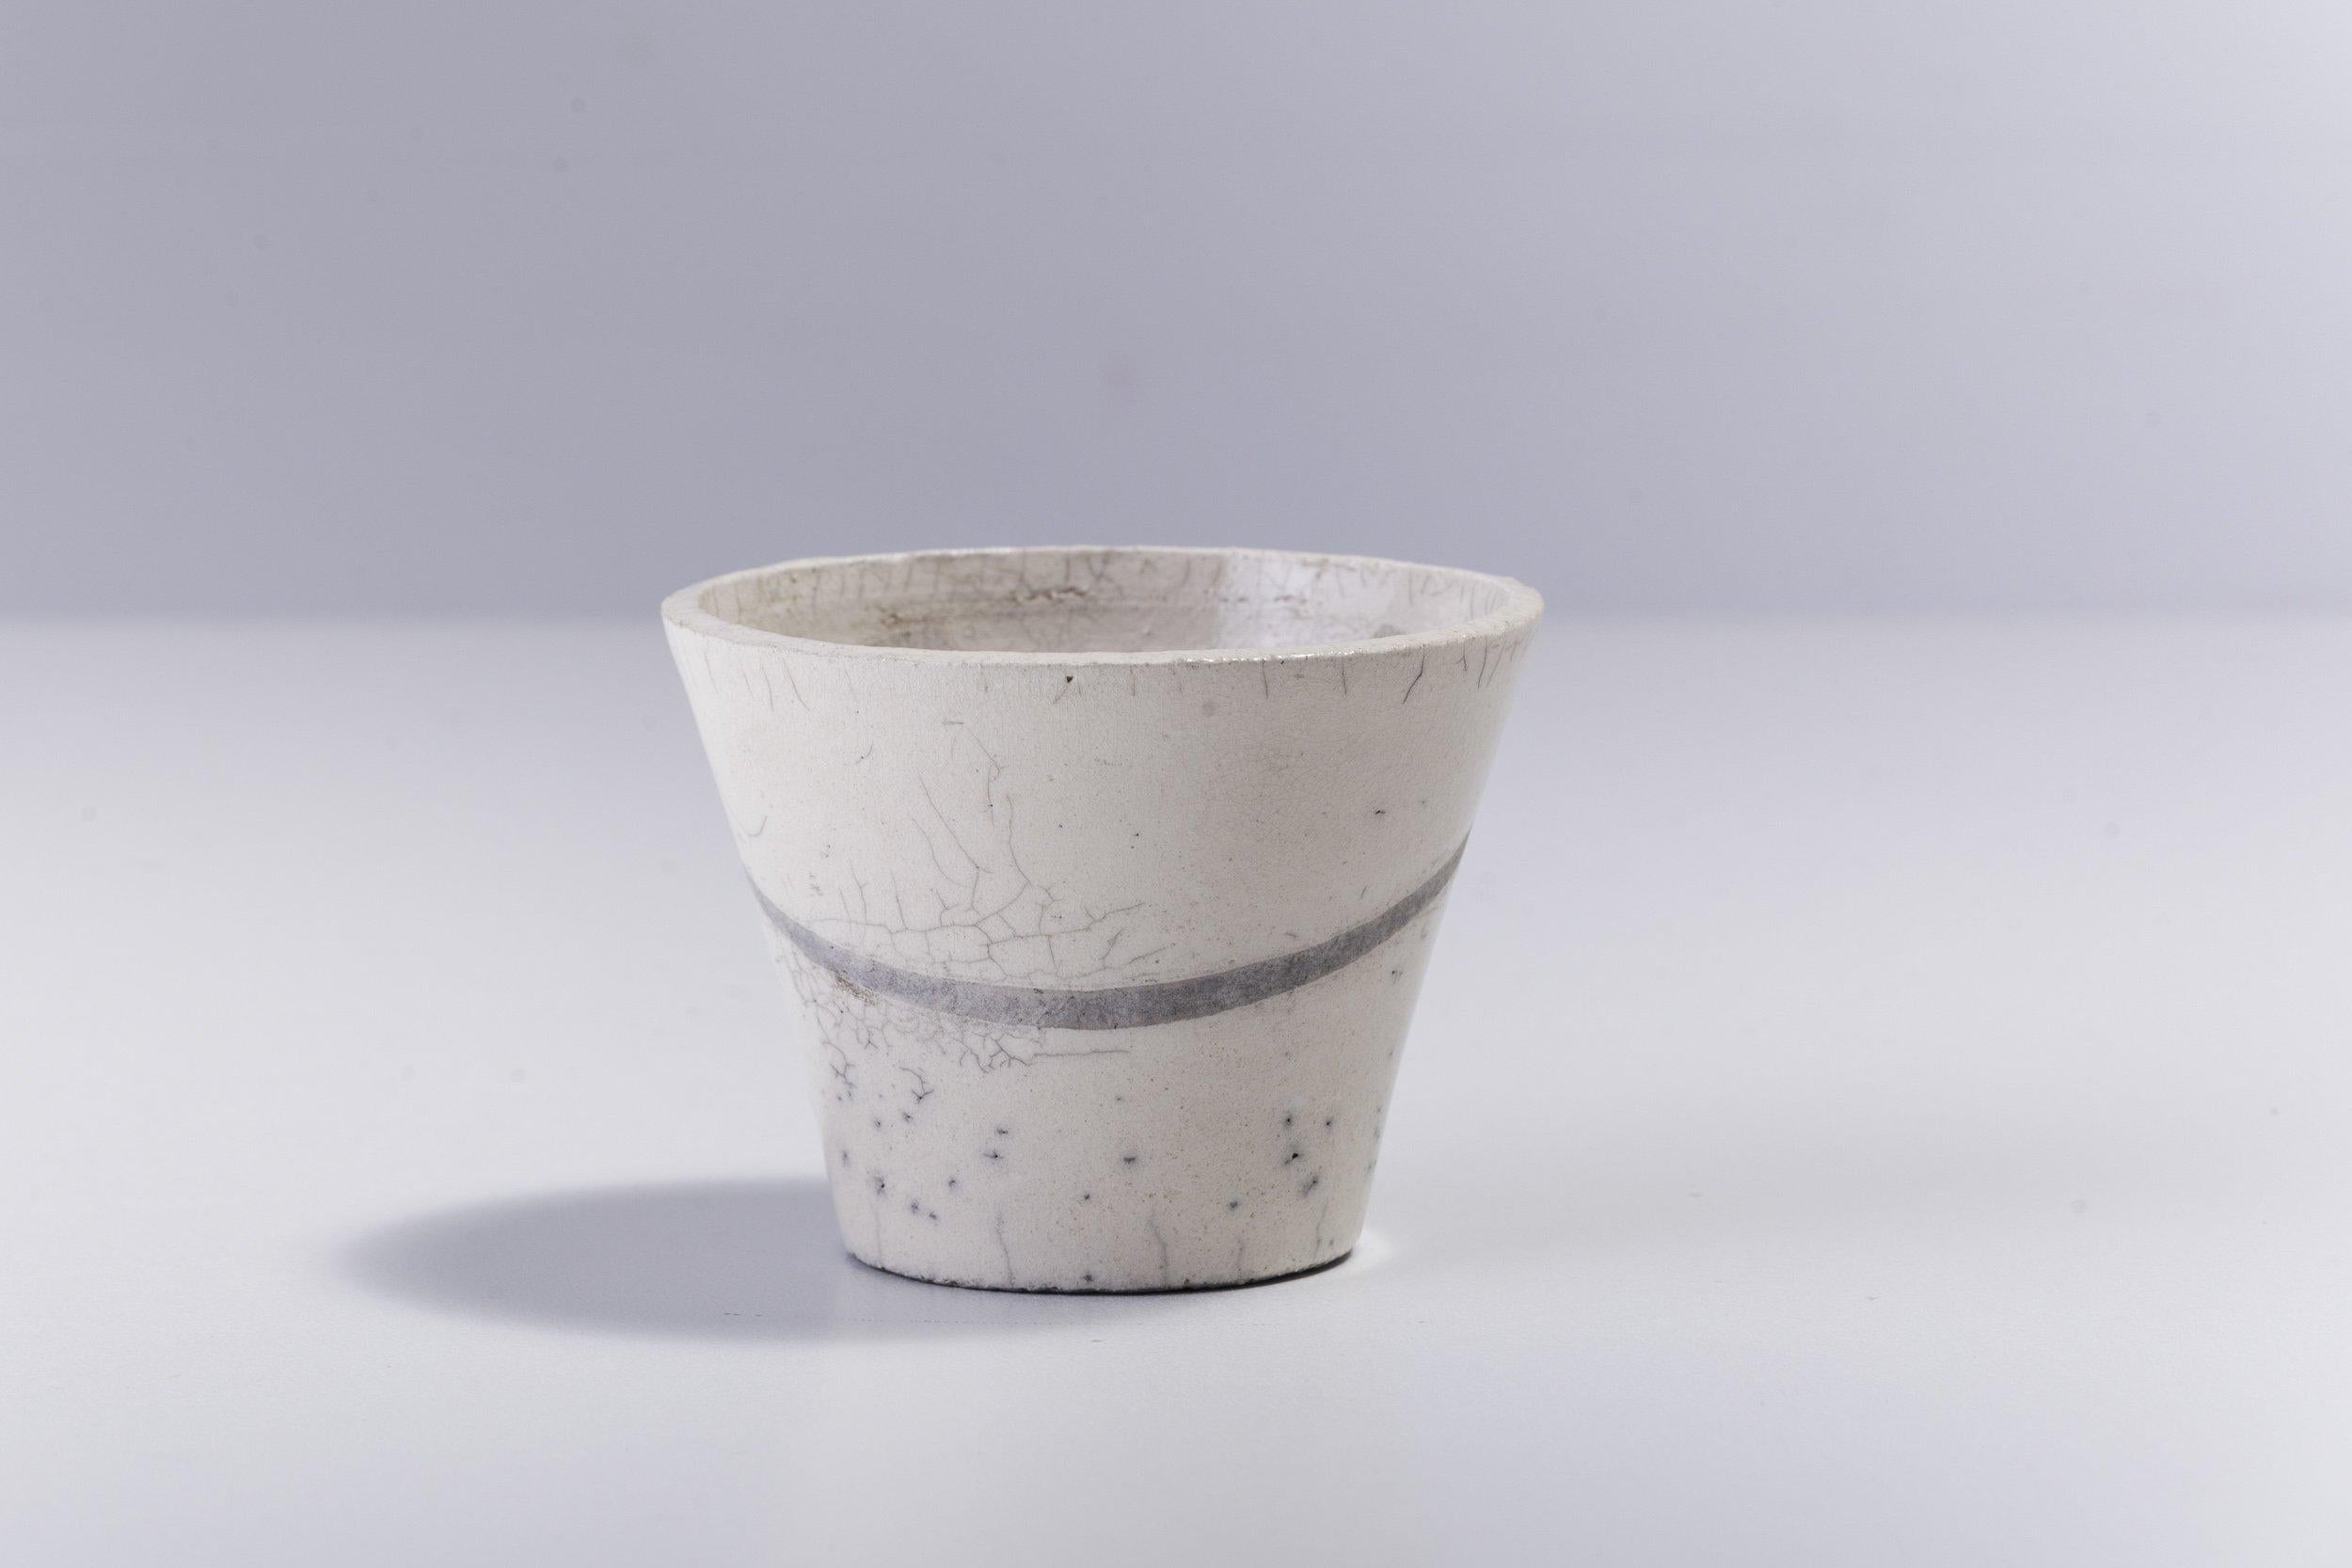 Fringe chawan s set of 2 bowls

Handcrafted following the Raku tradition, an ancient Japanese technique in which potters heat and cool the pottery quickly to create unique effects, this gorgeous set of two chawan bowls pops in any context thanks